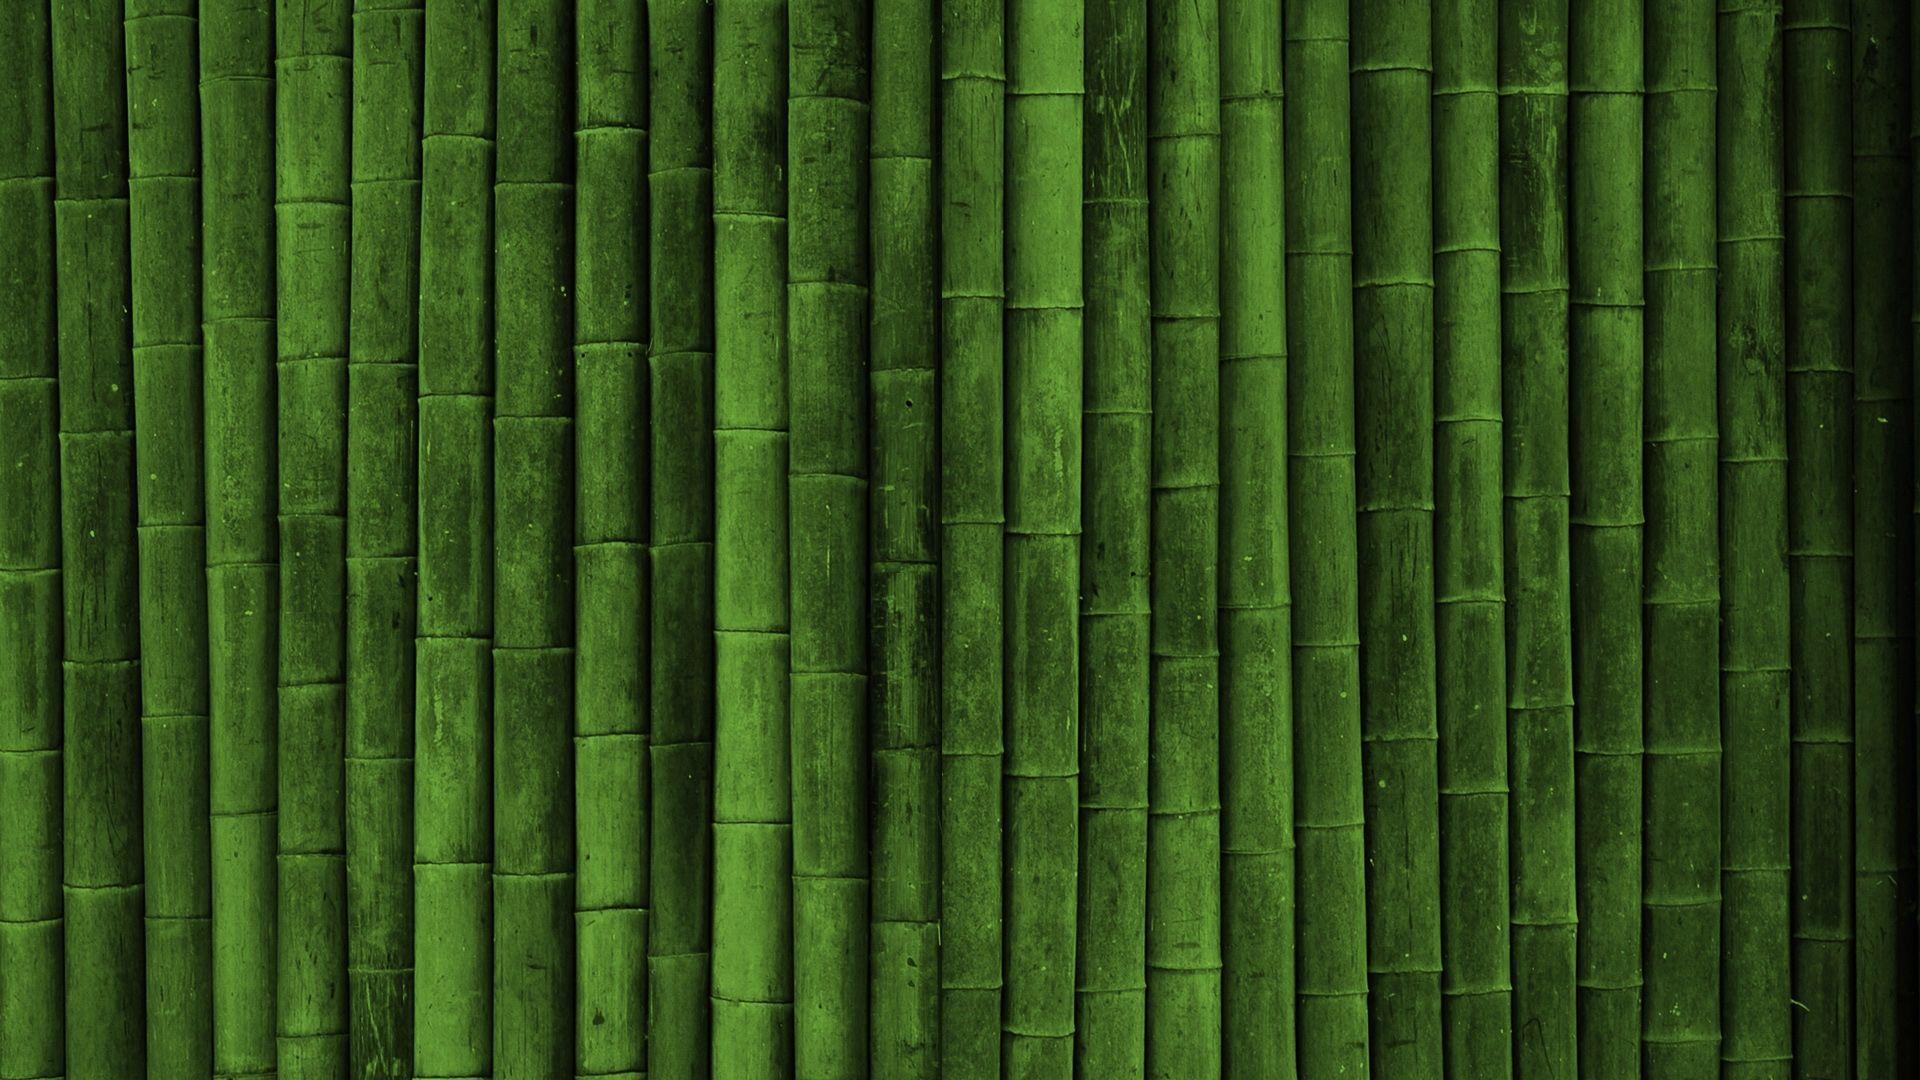 MIUI Resources Team] 10 Texture Smooth Wallpaper [1920*1080